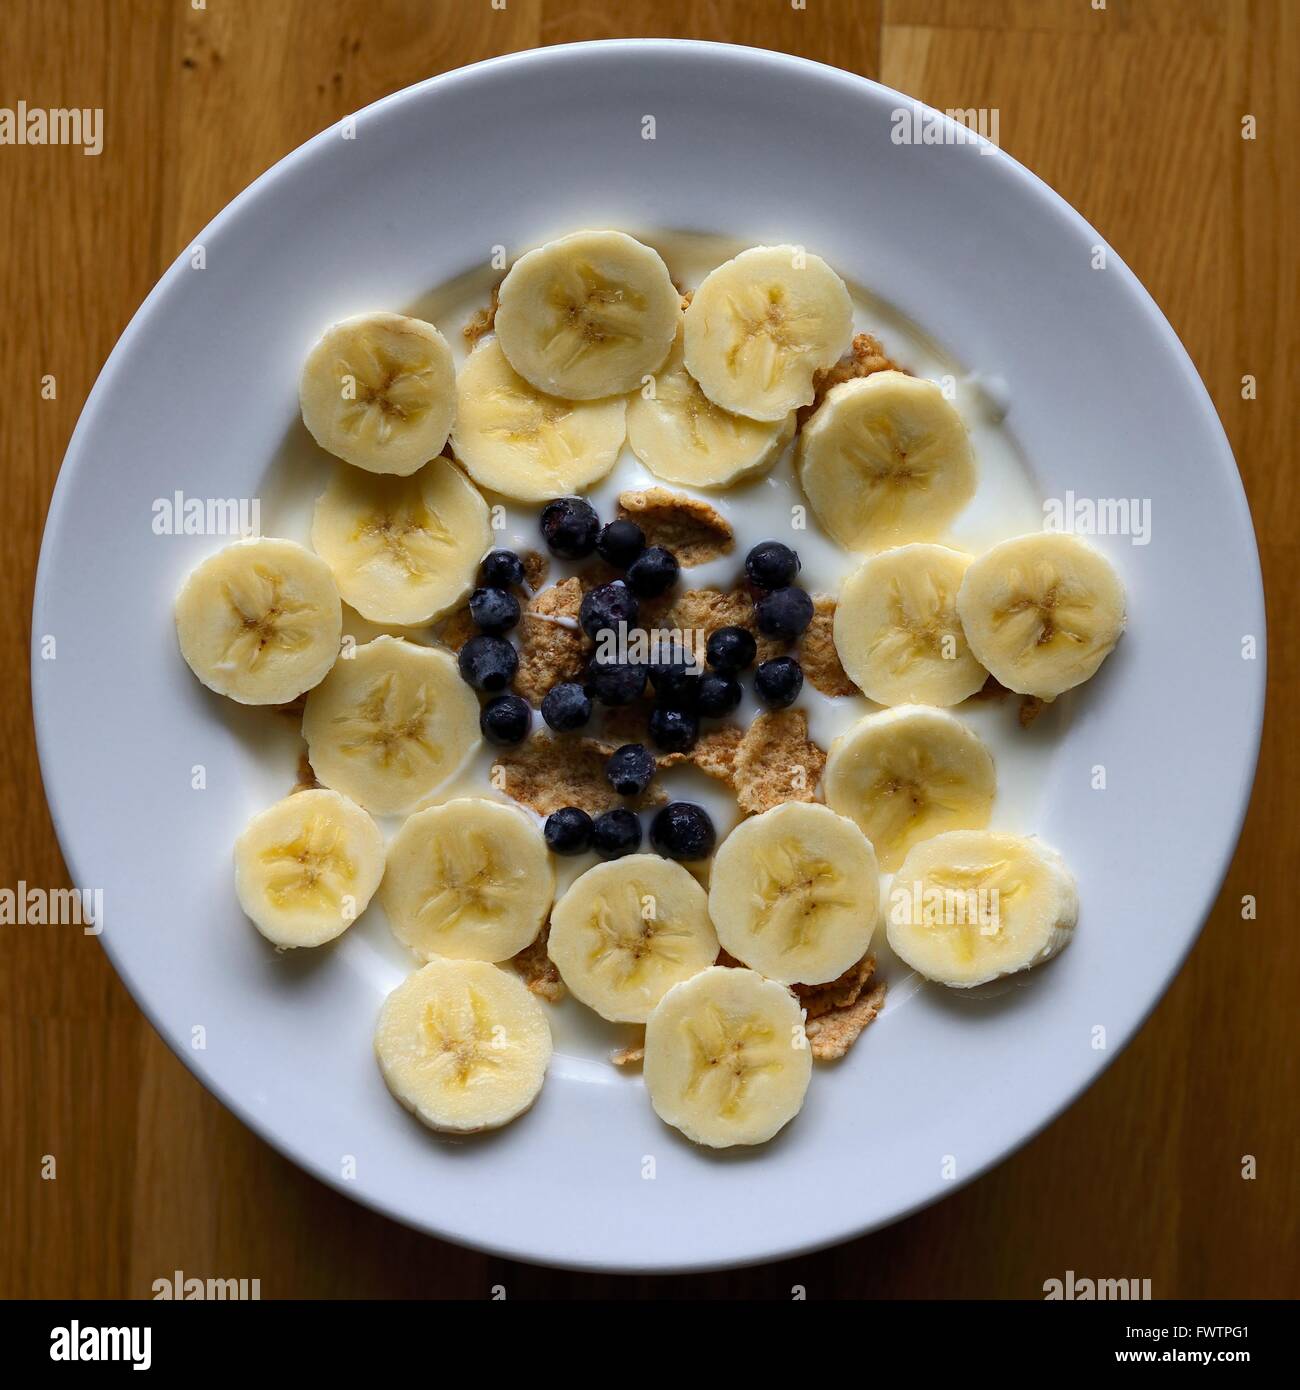 Breakfast cereal with fruit on a wood background Stock Photo